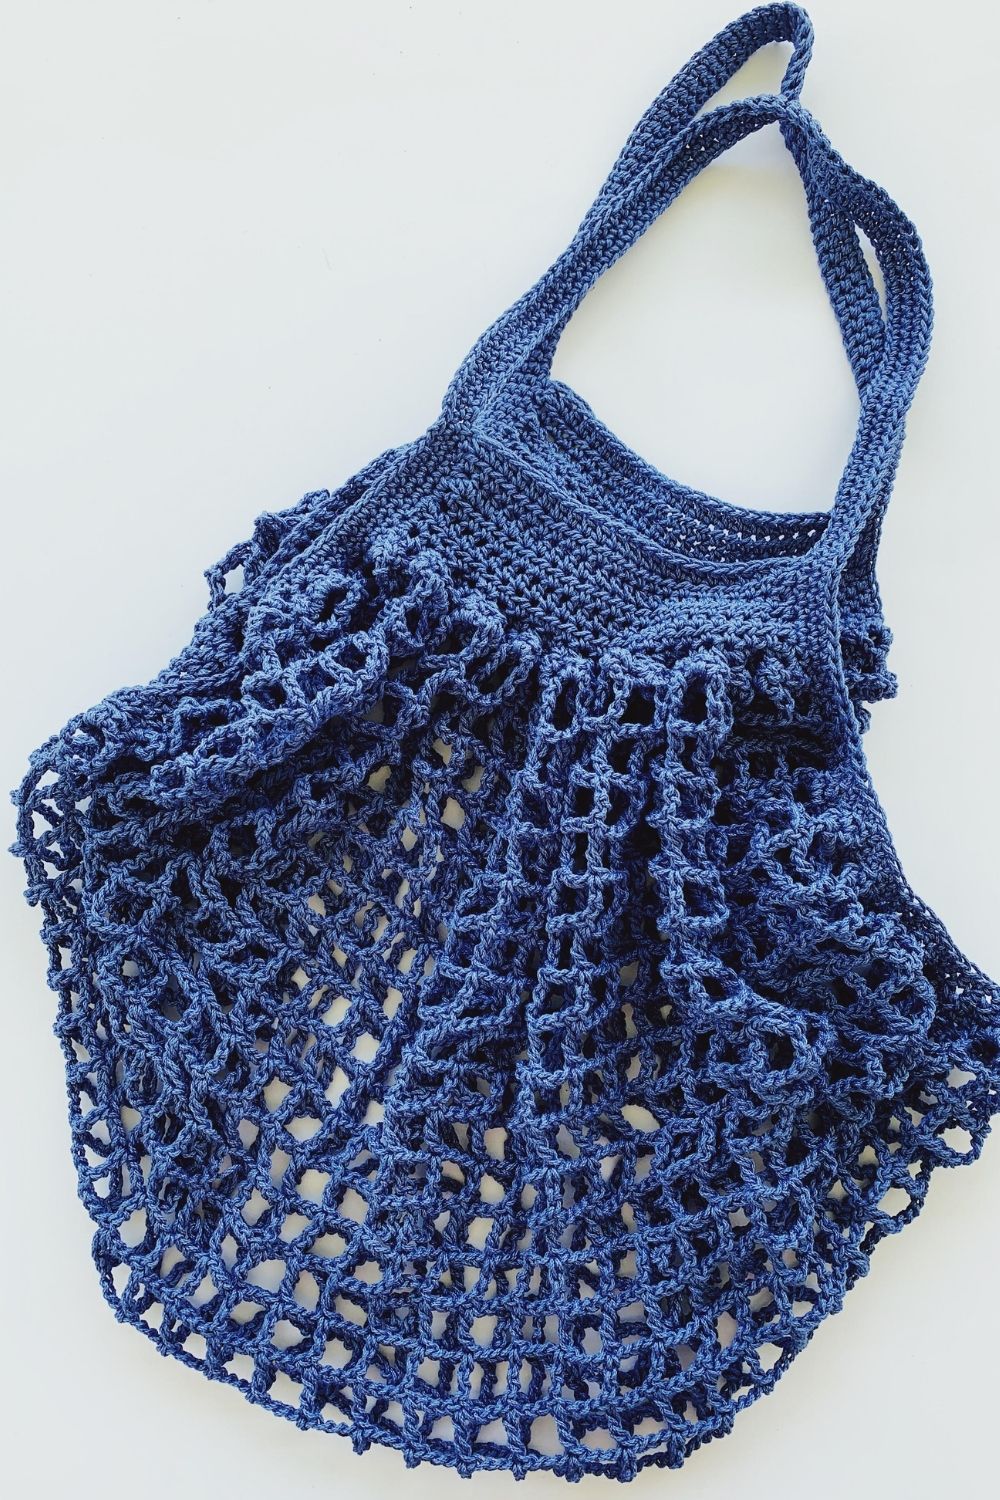 15 Crochet Market Bag Patterns to Whip Up for Your Farmer's Market Trip